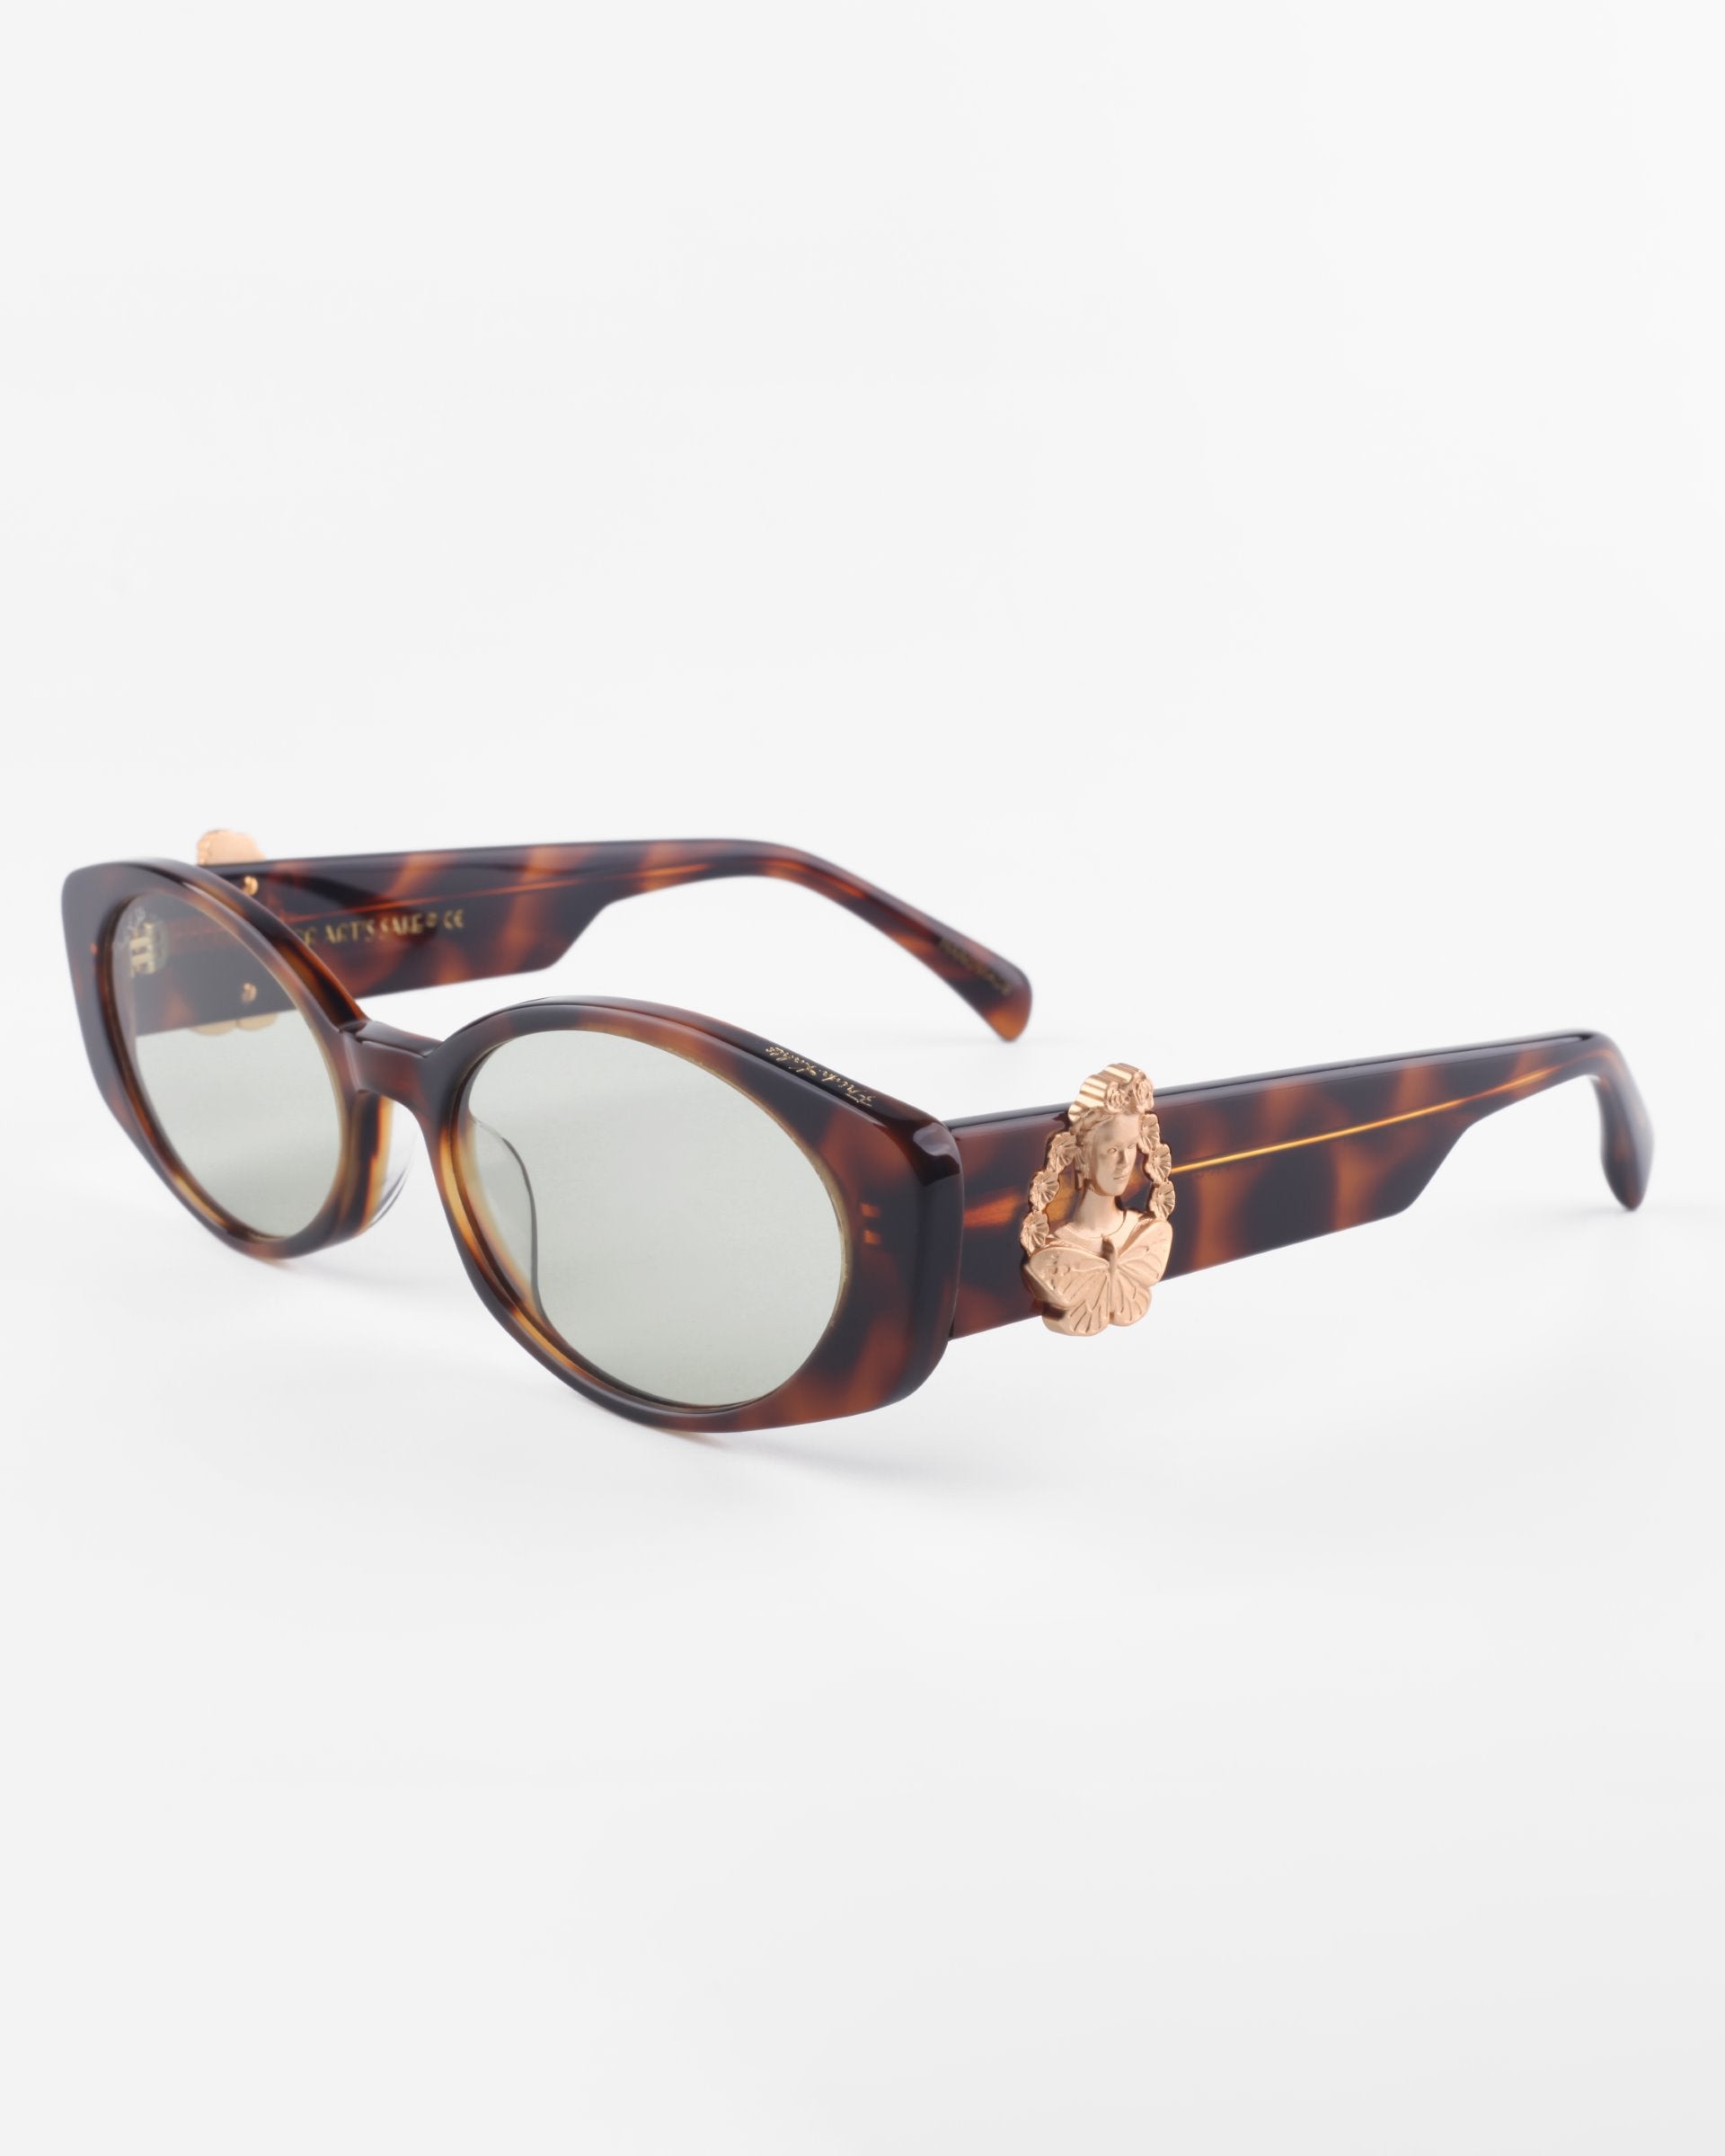 A pair of stylish Frida Portrait sunglasses by For Art&#39;s Sake® with oval lenses and tortoiseshell frames. The sunglasses feature decorative 18-karat gold-plated lion head embellishments on the temples near the hinges. The ultra-lightweight nylon lenses offer 100% UVA &amp; UVB protection and are tinted in a light gray shade. The background is plain white.